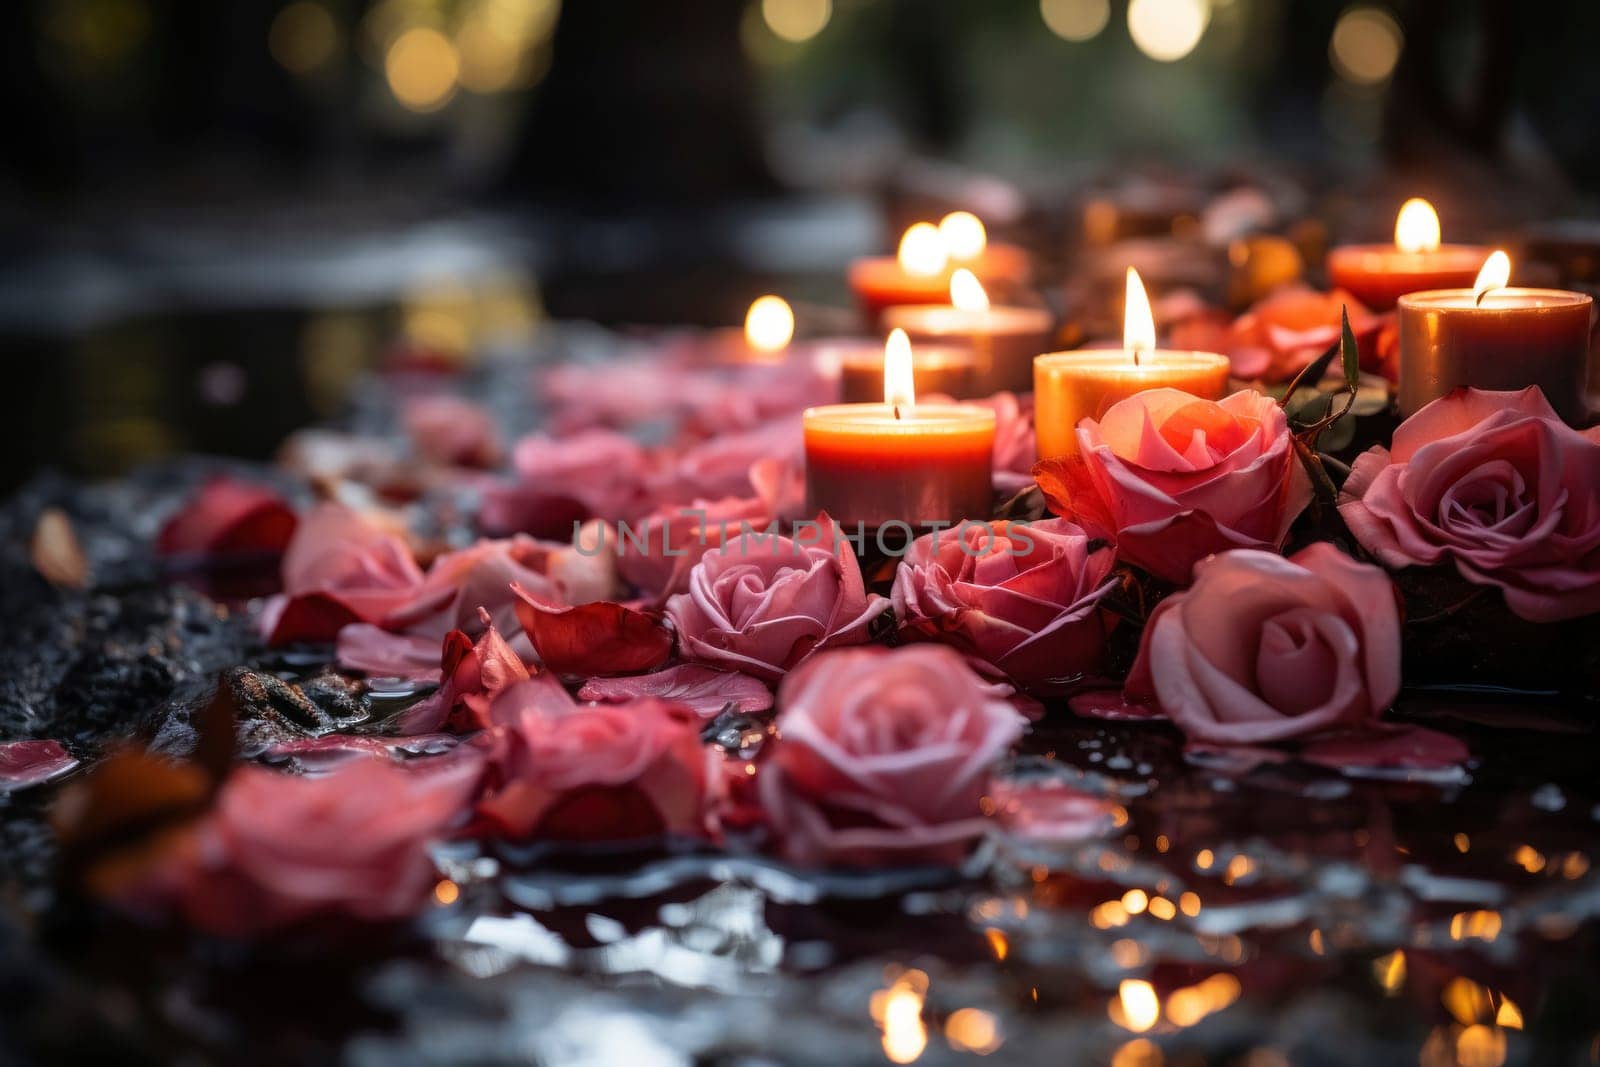 An intimate setting with pink roses and lit candles on a reflective surface, creating a warm, romantic atmosphere.